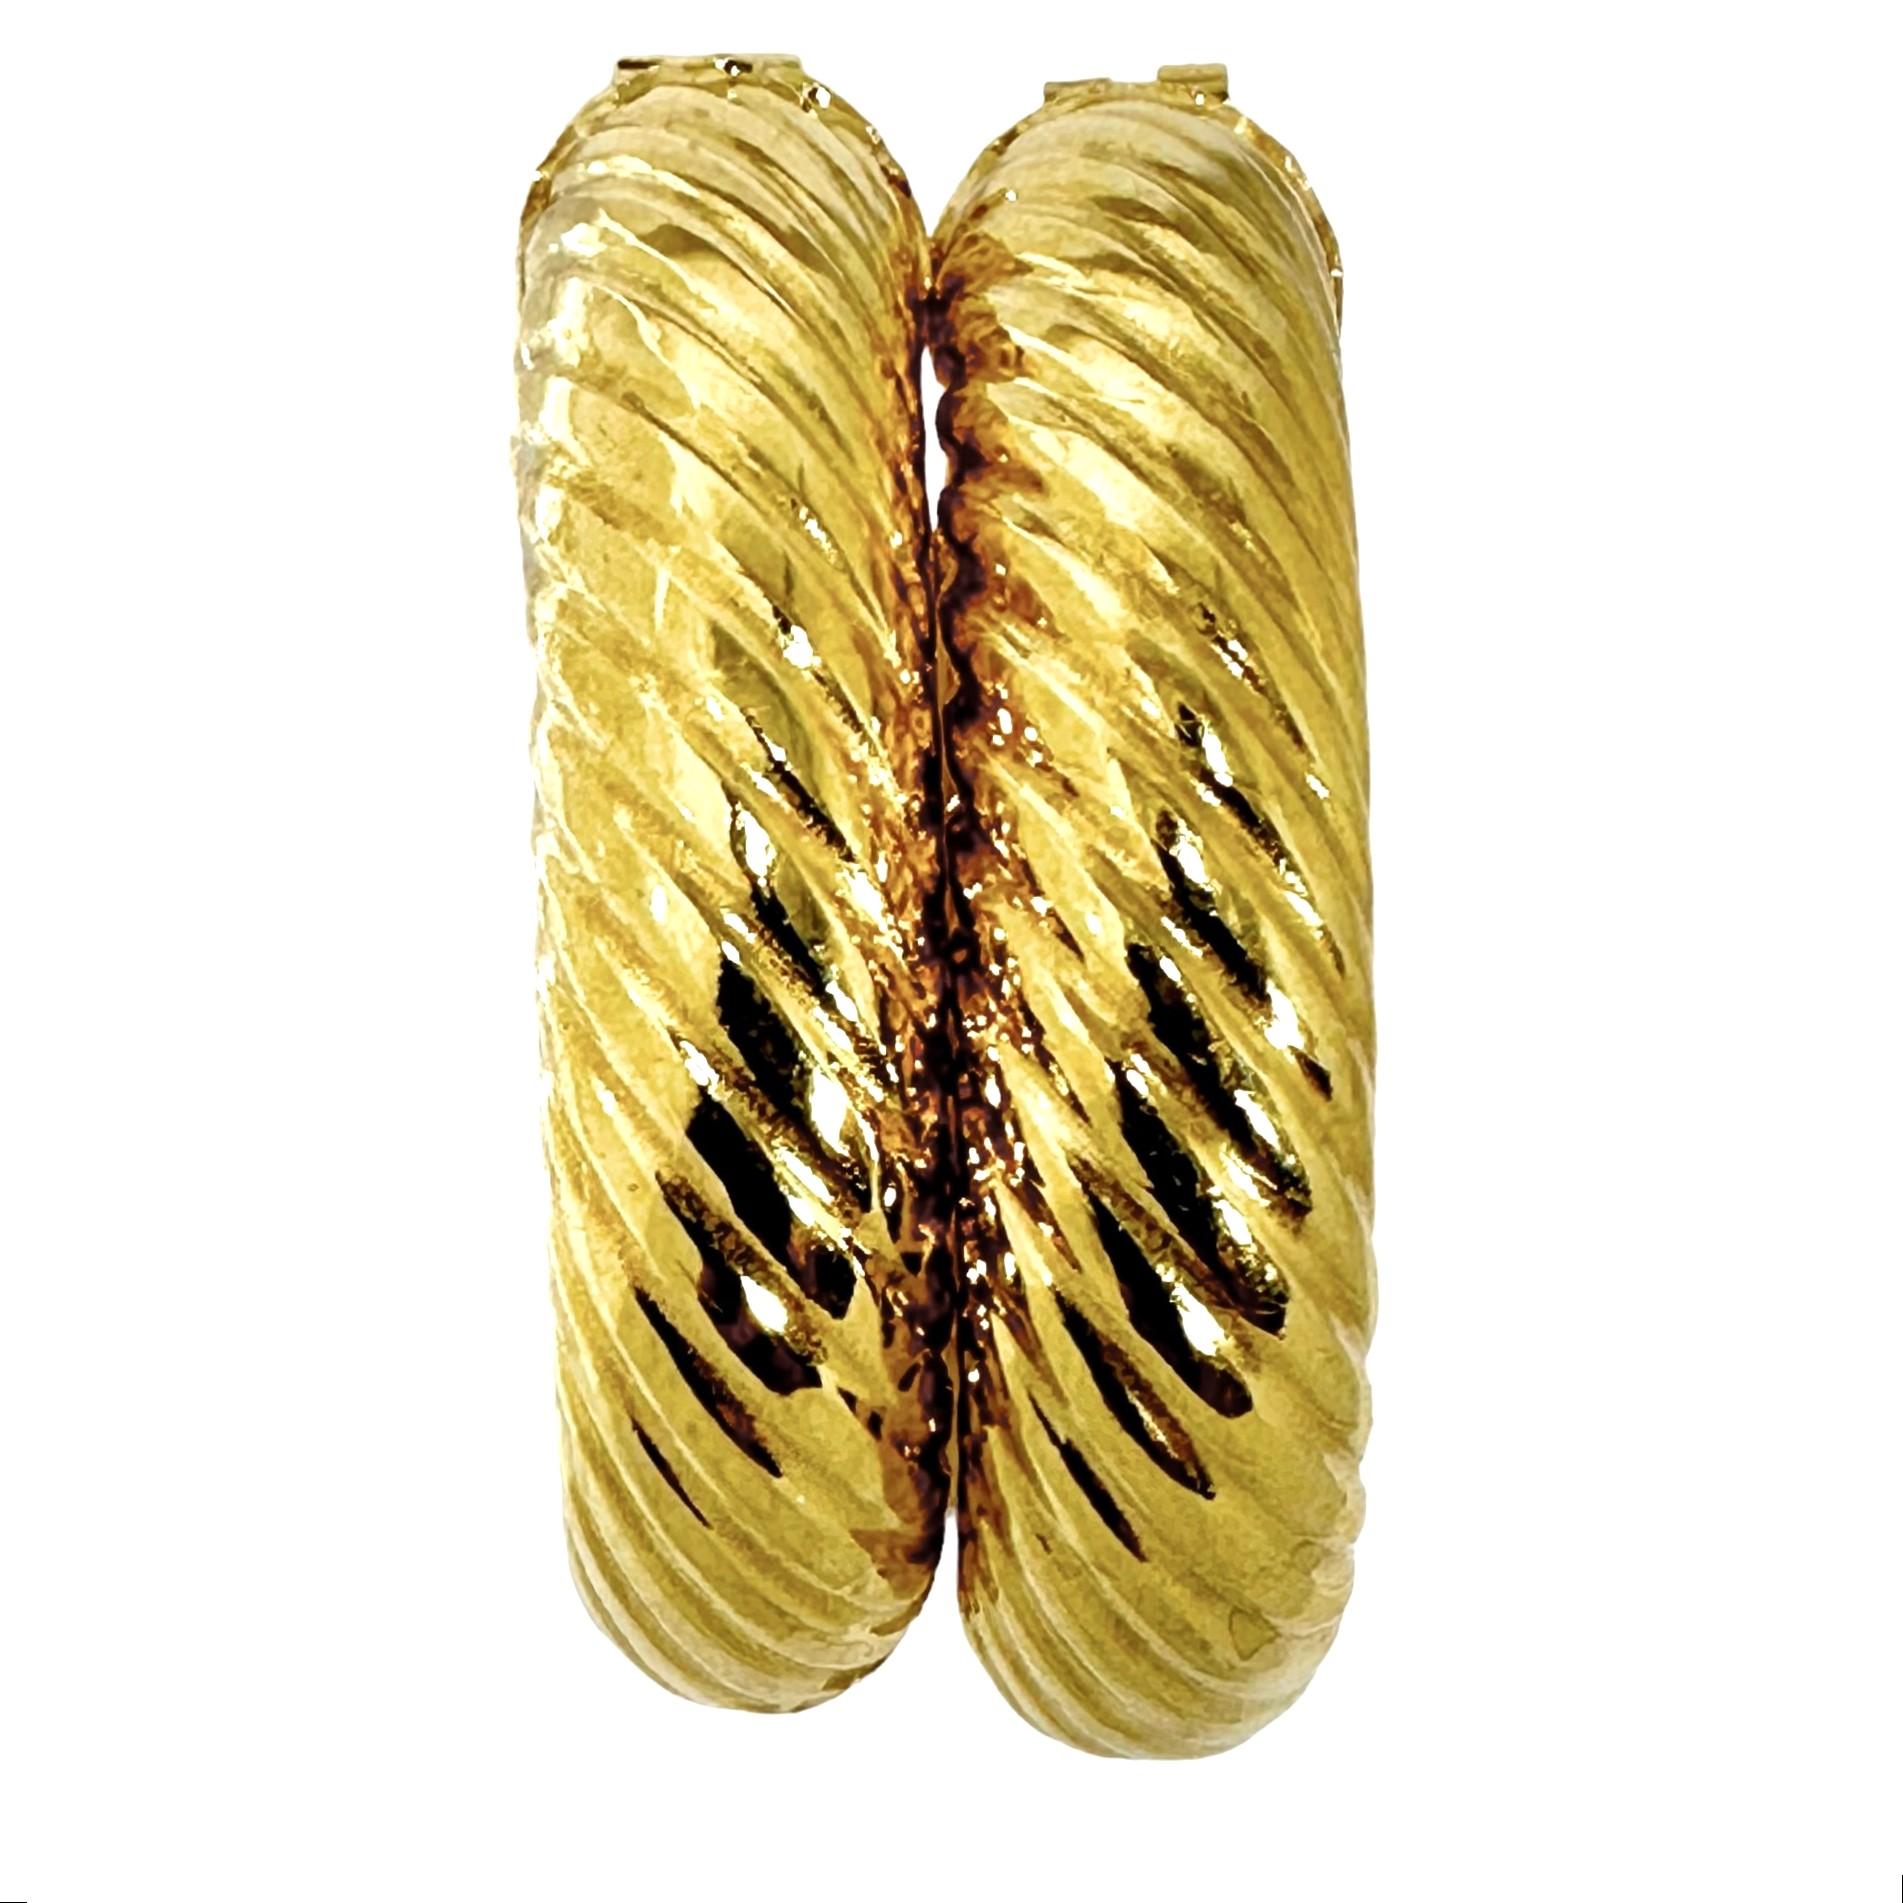 This wonderful pair of Italian 18k yellow gold hollow puffed hoop earrings are large but not overbearing. They demonstrate all of the style and quality for which Italian goldsmiths are admired. They measure 1  1/4 inches in length by  1  1/8 inches